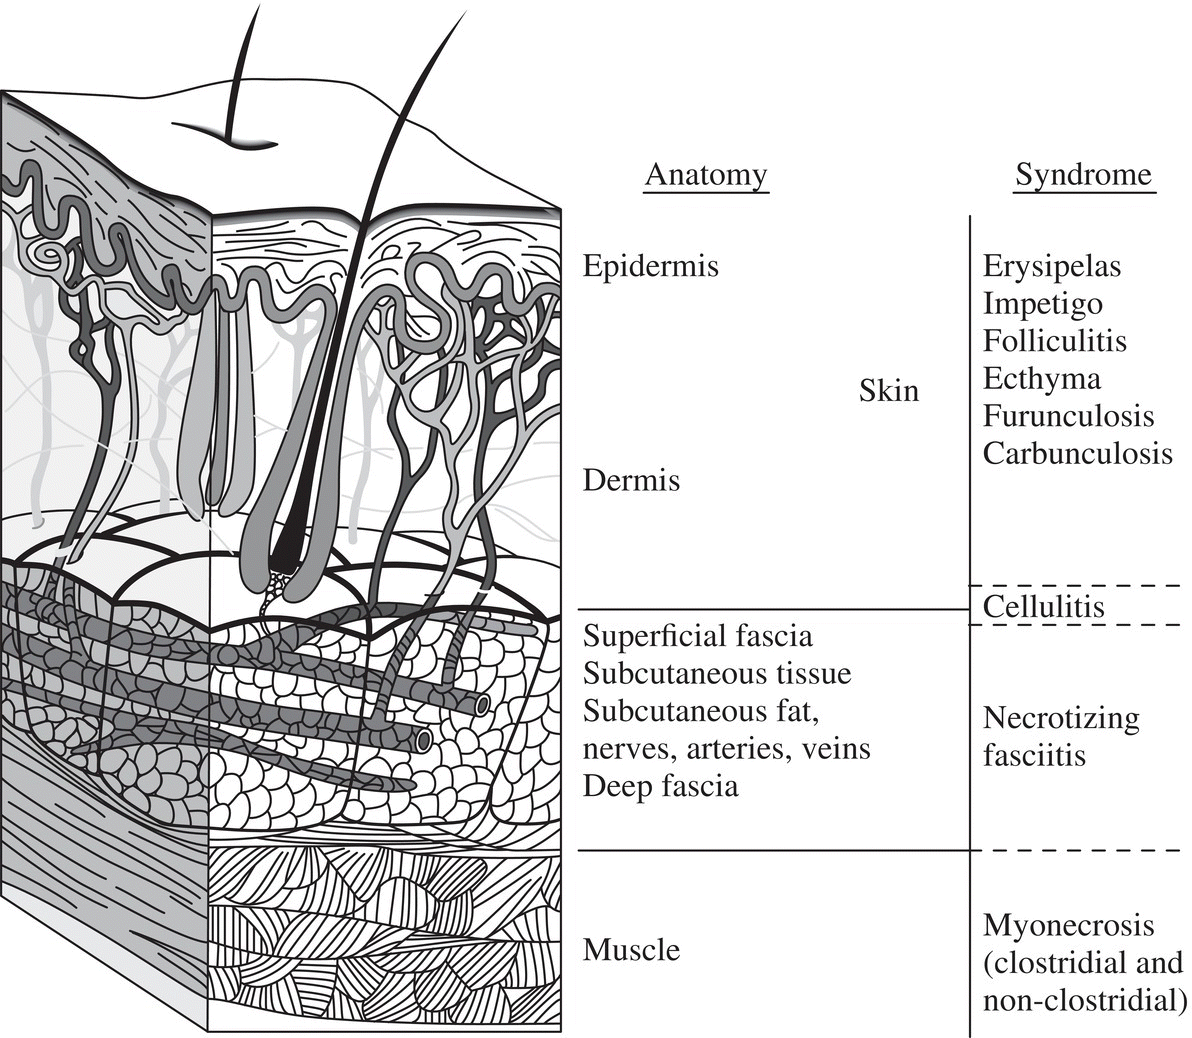 Schematic illustration of the different layers of the skin and the corresponding infections associated with each layer.